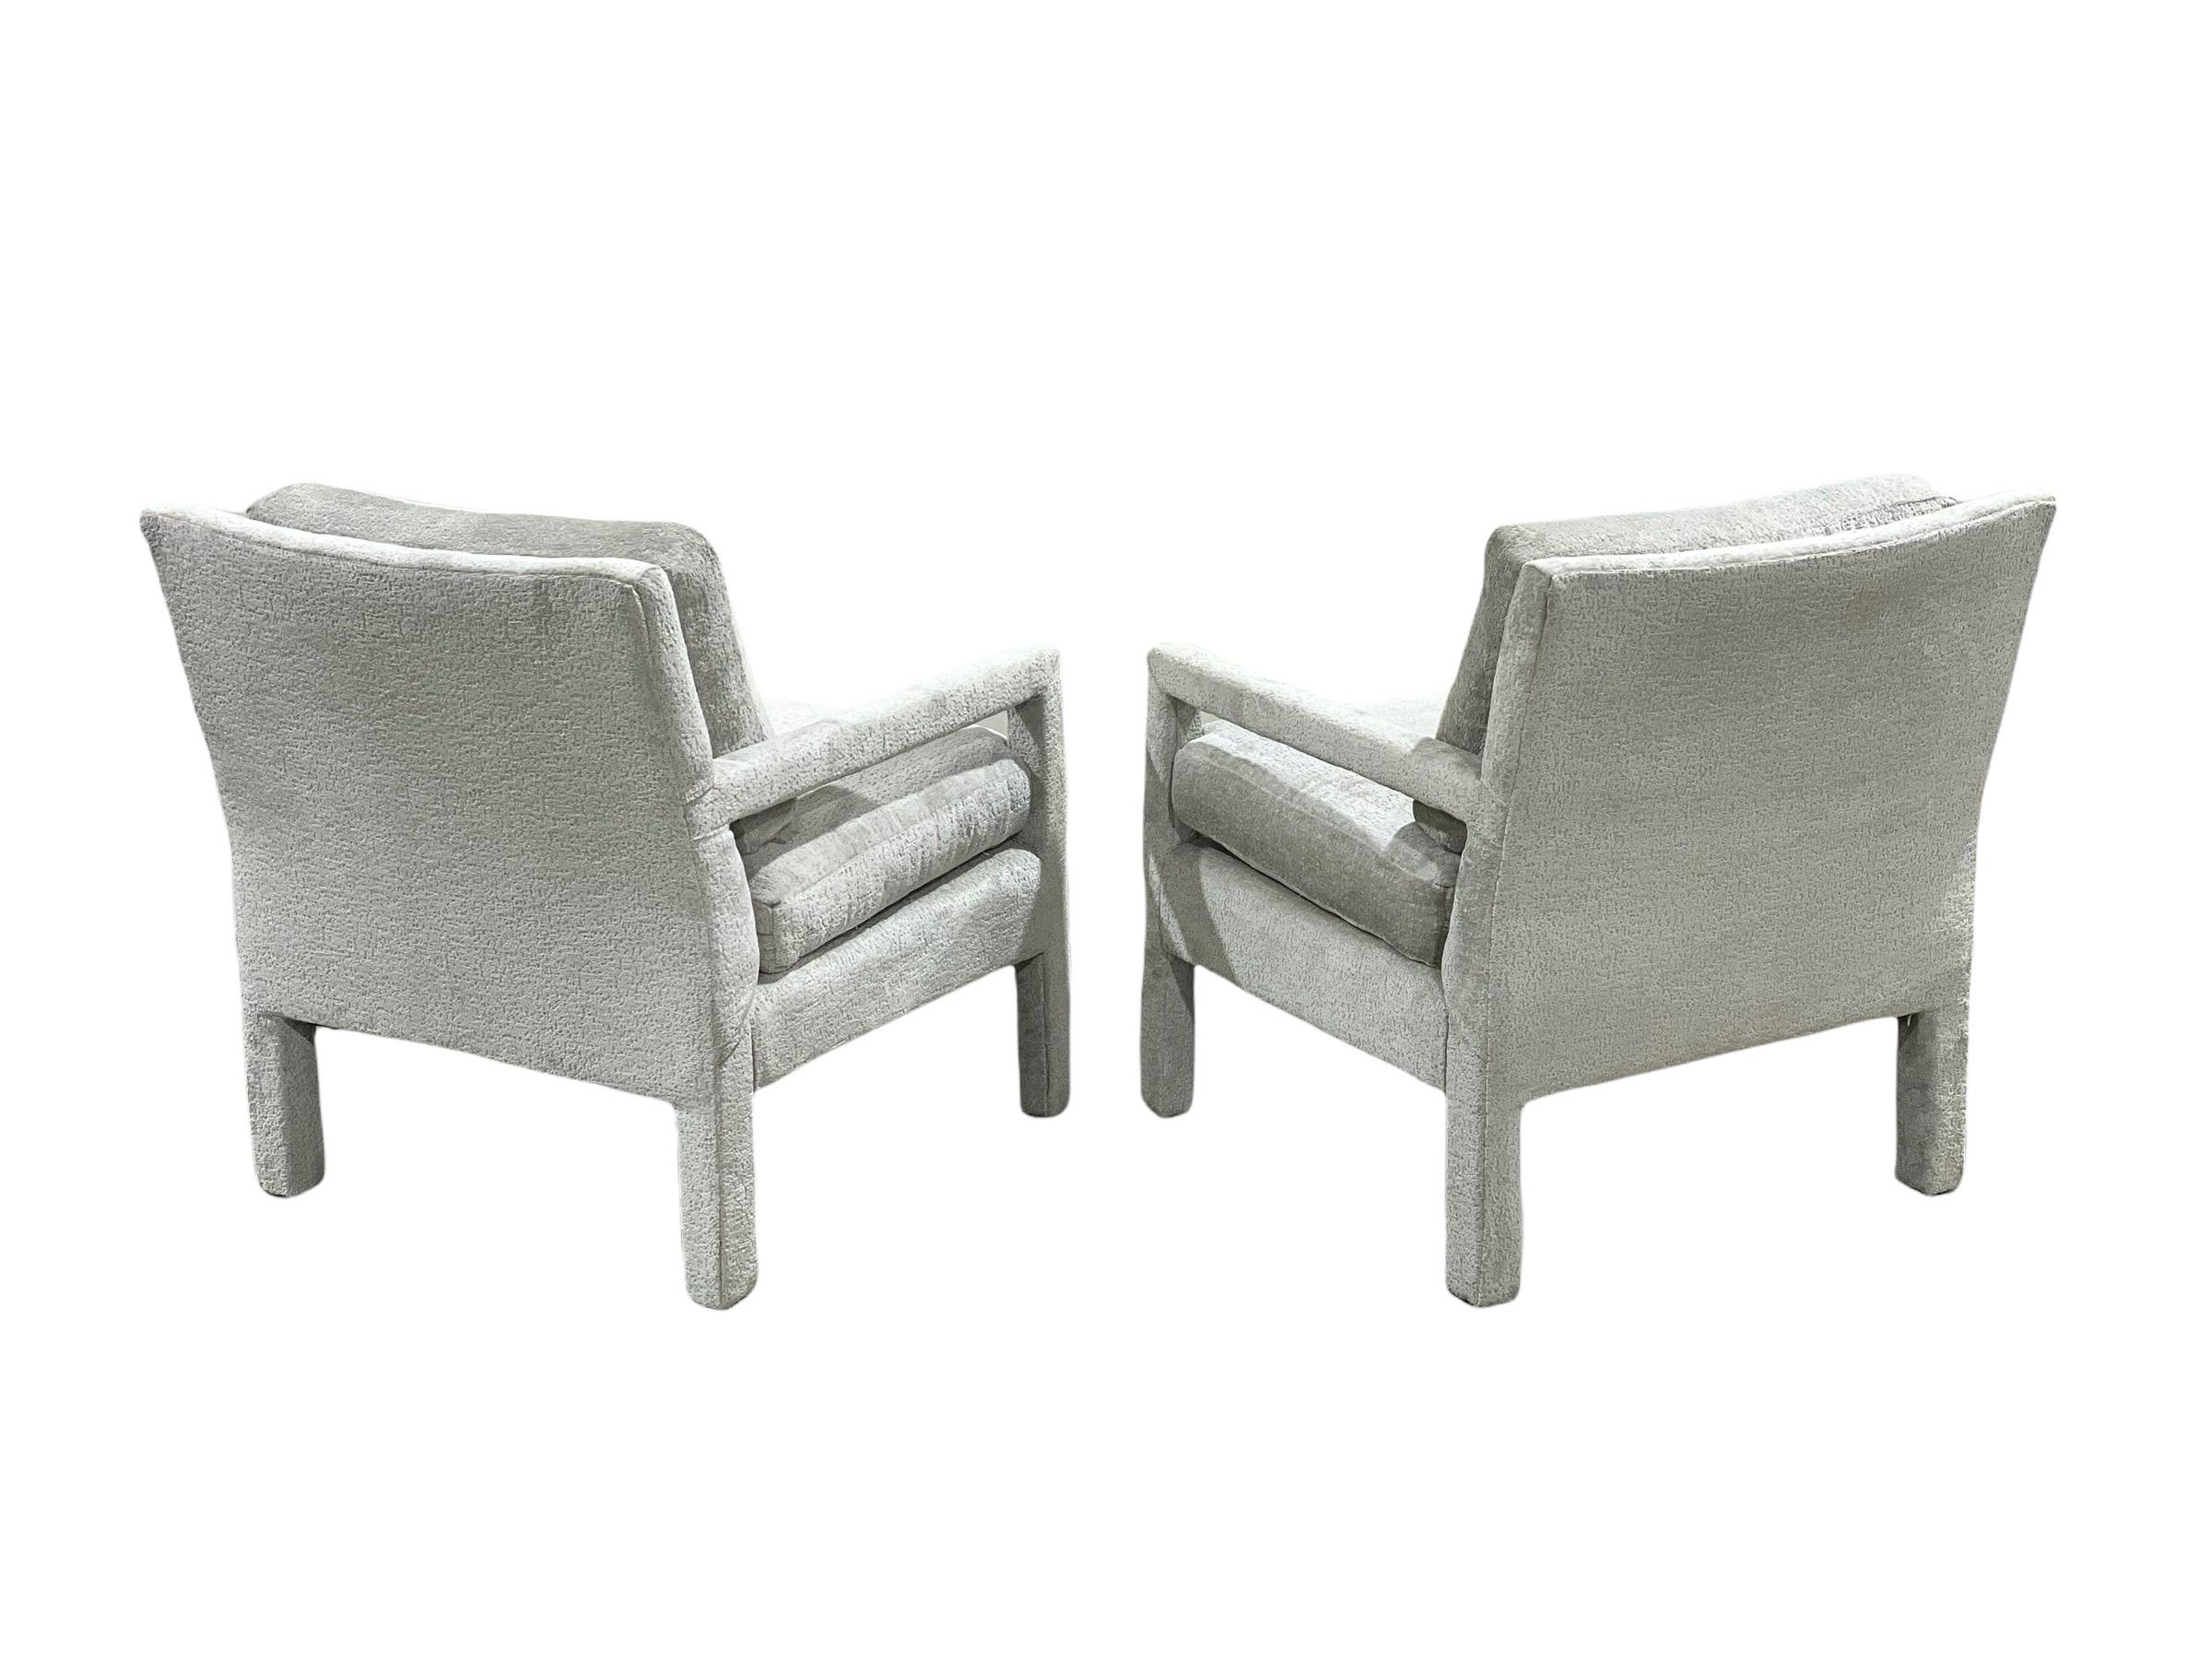 Wood Pair Midcentury Parsons Style Lounge Chairs by Bernhardt, After Milo Baughman